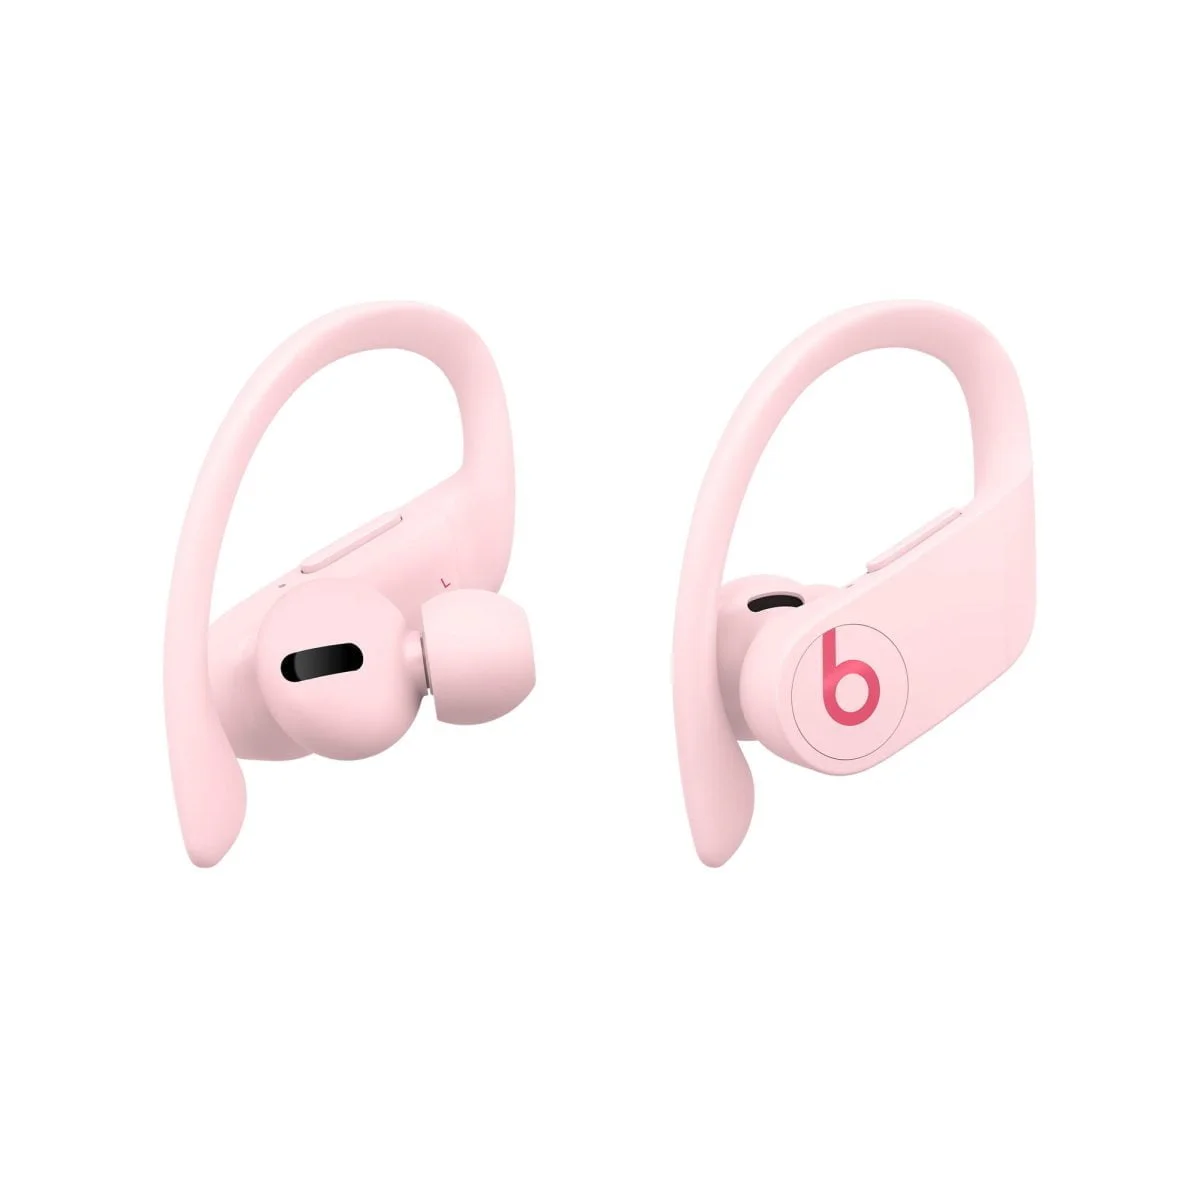 Mxy72 Av1 Apple &Lt;H1&Gt;&Lt;Span Class=&Quot;Pdp-Lrg-Header Rte-Plg-El&Quot;&Gt;Powerbeats Pro&Lt;/Span&Gt;&Lt;/H1&Gt; Powerbeats Pro, Powered By The Apple H1 Headphone Chip, Will Revolutionize The Way You Work Out. Built For Elite Athletes, These Totally Wireless Earphones Have No Wires To Hold You Back. The Adjustable, Secure-Fit Earhooks Are Customizable With Multiple Eartip Options For Extended Comfort And Are Made To Stay In Place, No Matter How Hard You Go. This Lightweight Earphone Is Built For Performance With A Reinforced Design For Ipx4-Rated Sweat And Water Resistance So You Can Take Your Workouts To The Next Level. With Up To 9 Hours Of Listening Time In Each Earbud And Powerful, Balanced Sound, You’ll Always Have Your Music To Motivate You. [Video Width=&Quot;1280&Quot; Height=&Quot;720&Quot; M4V=&Quot;Https://Lablaab.com/Wp-Content/Uploads/2020/10/Powerbeats-Pro-Totally-Wireless-Earphones-Black-Education-Apple-Ca.m4V&Quot;][/Video] &Lt;H2&Gt;&Lt;Span Style=&Quot;Color: #1B1919;Font-Size: 24Px&Quot;&Gt;Made For Movement&Lt;/Span&Gt;&Lt;/H2&Gt; &Lt;Div&Gt; &Lt;Span Class=&Quot;Pdp-Lrg-Body Rte-Plg-El&Quot;&Gt;Adjustable, Secure-Fit Earhooks Stay In Place With Multiple Eartip Options, And Are Made To Move With You, No Matter Where You Go.&Lt;/Span&Gt; &Lt;/Div&Gt; &Lt;Div&Gt; &Lt;H2&Gt;&Lt;Span Class=&Quot;Pdp-Lrg-Body Rte-Plg-El&Quot;&Gt;Sweat &Amp; Water-Resistant&Lt;/Span&Gt;&Lt;/H2&Gt; &Lt;Span Class=&Quot;Pdp-Lrg-Body Rte-Plg-El&Quot;&Gt;Reinforced Design For Sweat And Water Resistance Help You Make It Through Whatever Your Day Brings.&Lt;/Span&Gt; &Lt;/Div&Gt; &Lt;Div&Gt; &Lt;H2&Gt;&Lt;Span Class=&Quot;Pdp-Lrg-Body Rte-Plg-El&Quot;&Gt;Up To 9 Hours Of Listening Time&Lt;/Span&Gt;&Lt;/H2&Gt; &Lt;Span Class=&Quot;Pdp-Lrg-Body Rte-Plg-El&Quot;&Gt;Get More Than 24 Hours Of Combined Playback With The Charging Case, And Use 5-Minute Fast Fuel For 1.5 Hours Of Playback When Battery Is Low&Lt;Sup&Gt;1&Lt;/Sup&Gt;.&Lt;/Span&Gt; &Lt;/Div&Gt; &Lt;Div&Gt; &Lt;H2&Gt;&Lt;Span Class=&Quot;Pdp-Lrg-Body Rte-Plg-El&Quot;&Gt;Play One Side Or Both&Lt;/Span&Gt;&Lt;/H2&Gt; &Lt;Span Class=&Quot;Pdp-Lrg-Body Rte-Plg-El&Quot;&Gt;Auto Play/Pause, Independent Earbud Connection Via The Apple H1 Chip, And Full Volume And Track Controls On Each Earbud Mean You’re In Charge Of How You Listen.&Lt;/Span&Gt; &Lt;/Div&Gt; &Lt;H3 Class=&Quot;Pdp-Detail-Title Pdp-Lrg-Body-B&Quot;&Gt;In The Box&Lt;/H3&Gt; &Lt;Div&Gt; &Lt;Ul Class=&Quot;Pdp-Lrg-Body&Quot;&Gt; &Lt;Li&Gt;Powerbeats Pro Totally Wireless Earphones&Lt;/Li&Gt; &Lt;Li&Gt;Charging Case&Lt;/Li&Gt; &Lt;Li&Gt;Eartips With Four Size Options&Lt;/Li&Gt; &Lt;Li&Gt;Lightning To Usb-A Charging Cable&Lt;/Li&Gt; &Lt;Li&Gt;Quick Start Guide&Lt;/Li&Gt; &Lt;Li&Gt;Warranty Card (One Year Manufacturer Warranty)&Lt;/Li&Gt; &Lt;/Ul&Gt; &Lt;/Div&Gt; Powerbeats Pro Powerbeats Pro In-Ear Wireless Headphones Beats By Dr. Dre - Cloud Pink